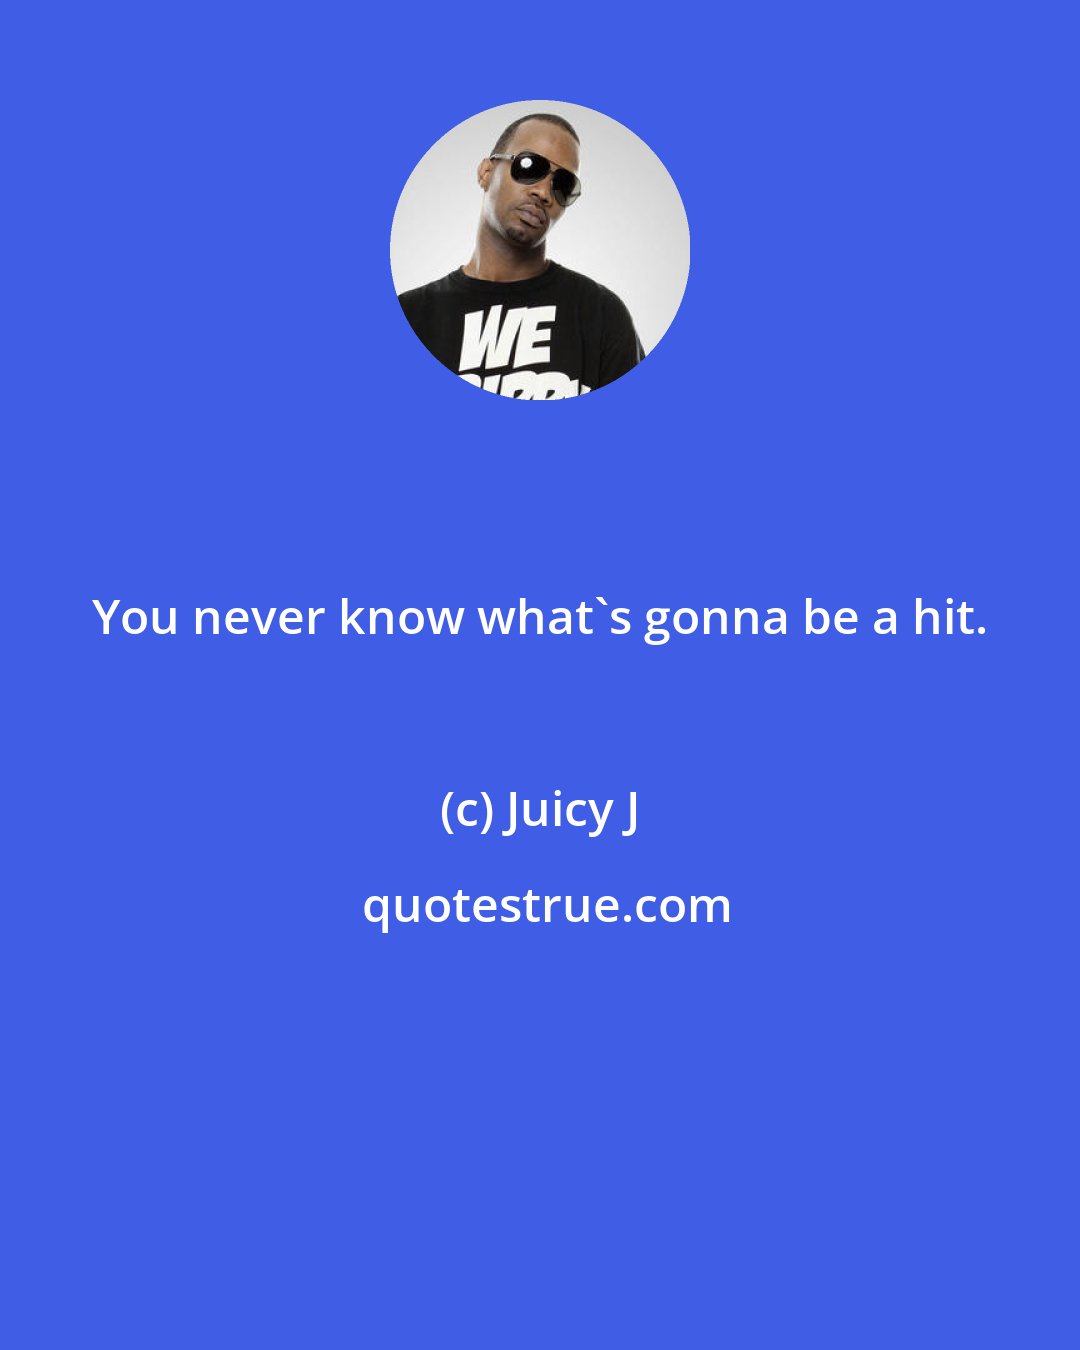 Juicy J: You never know what's gonna be a hit.